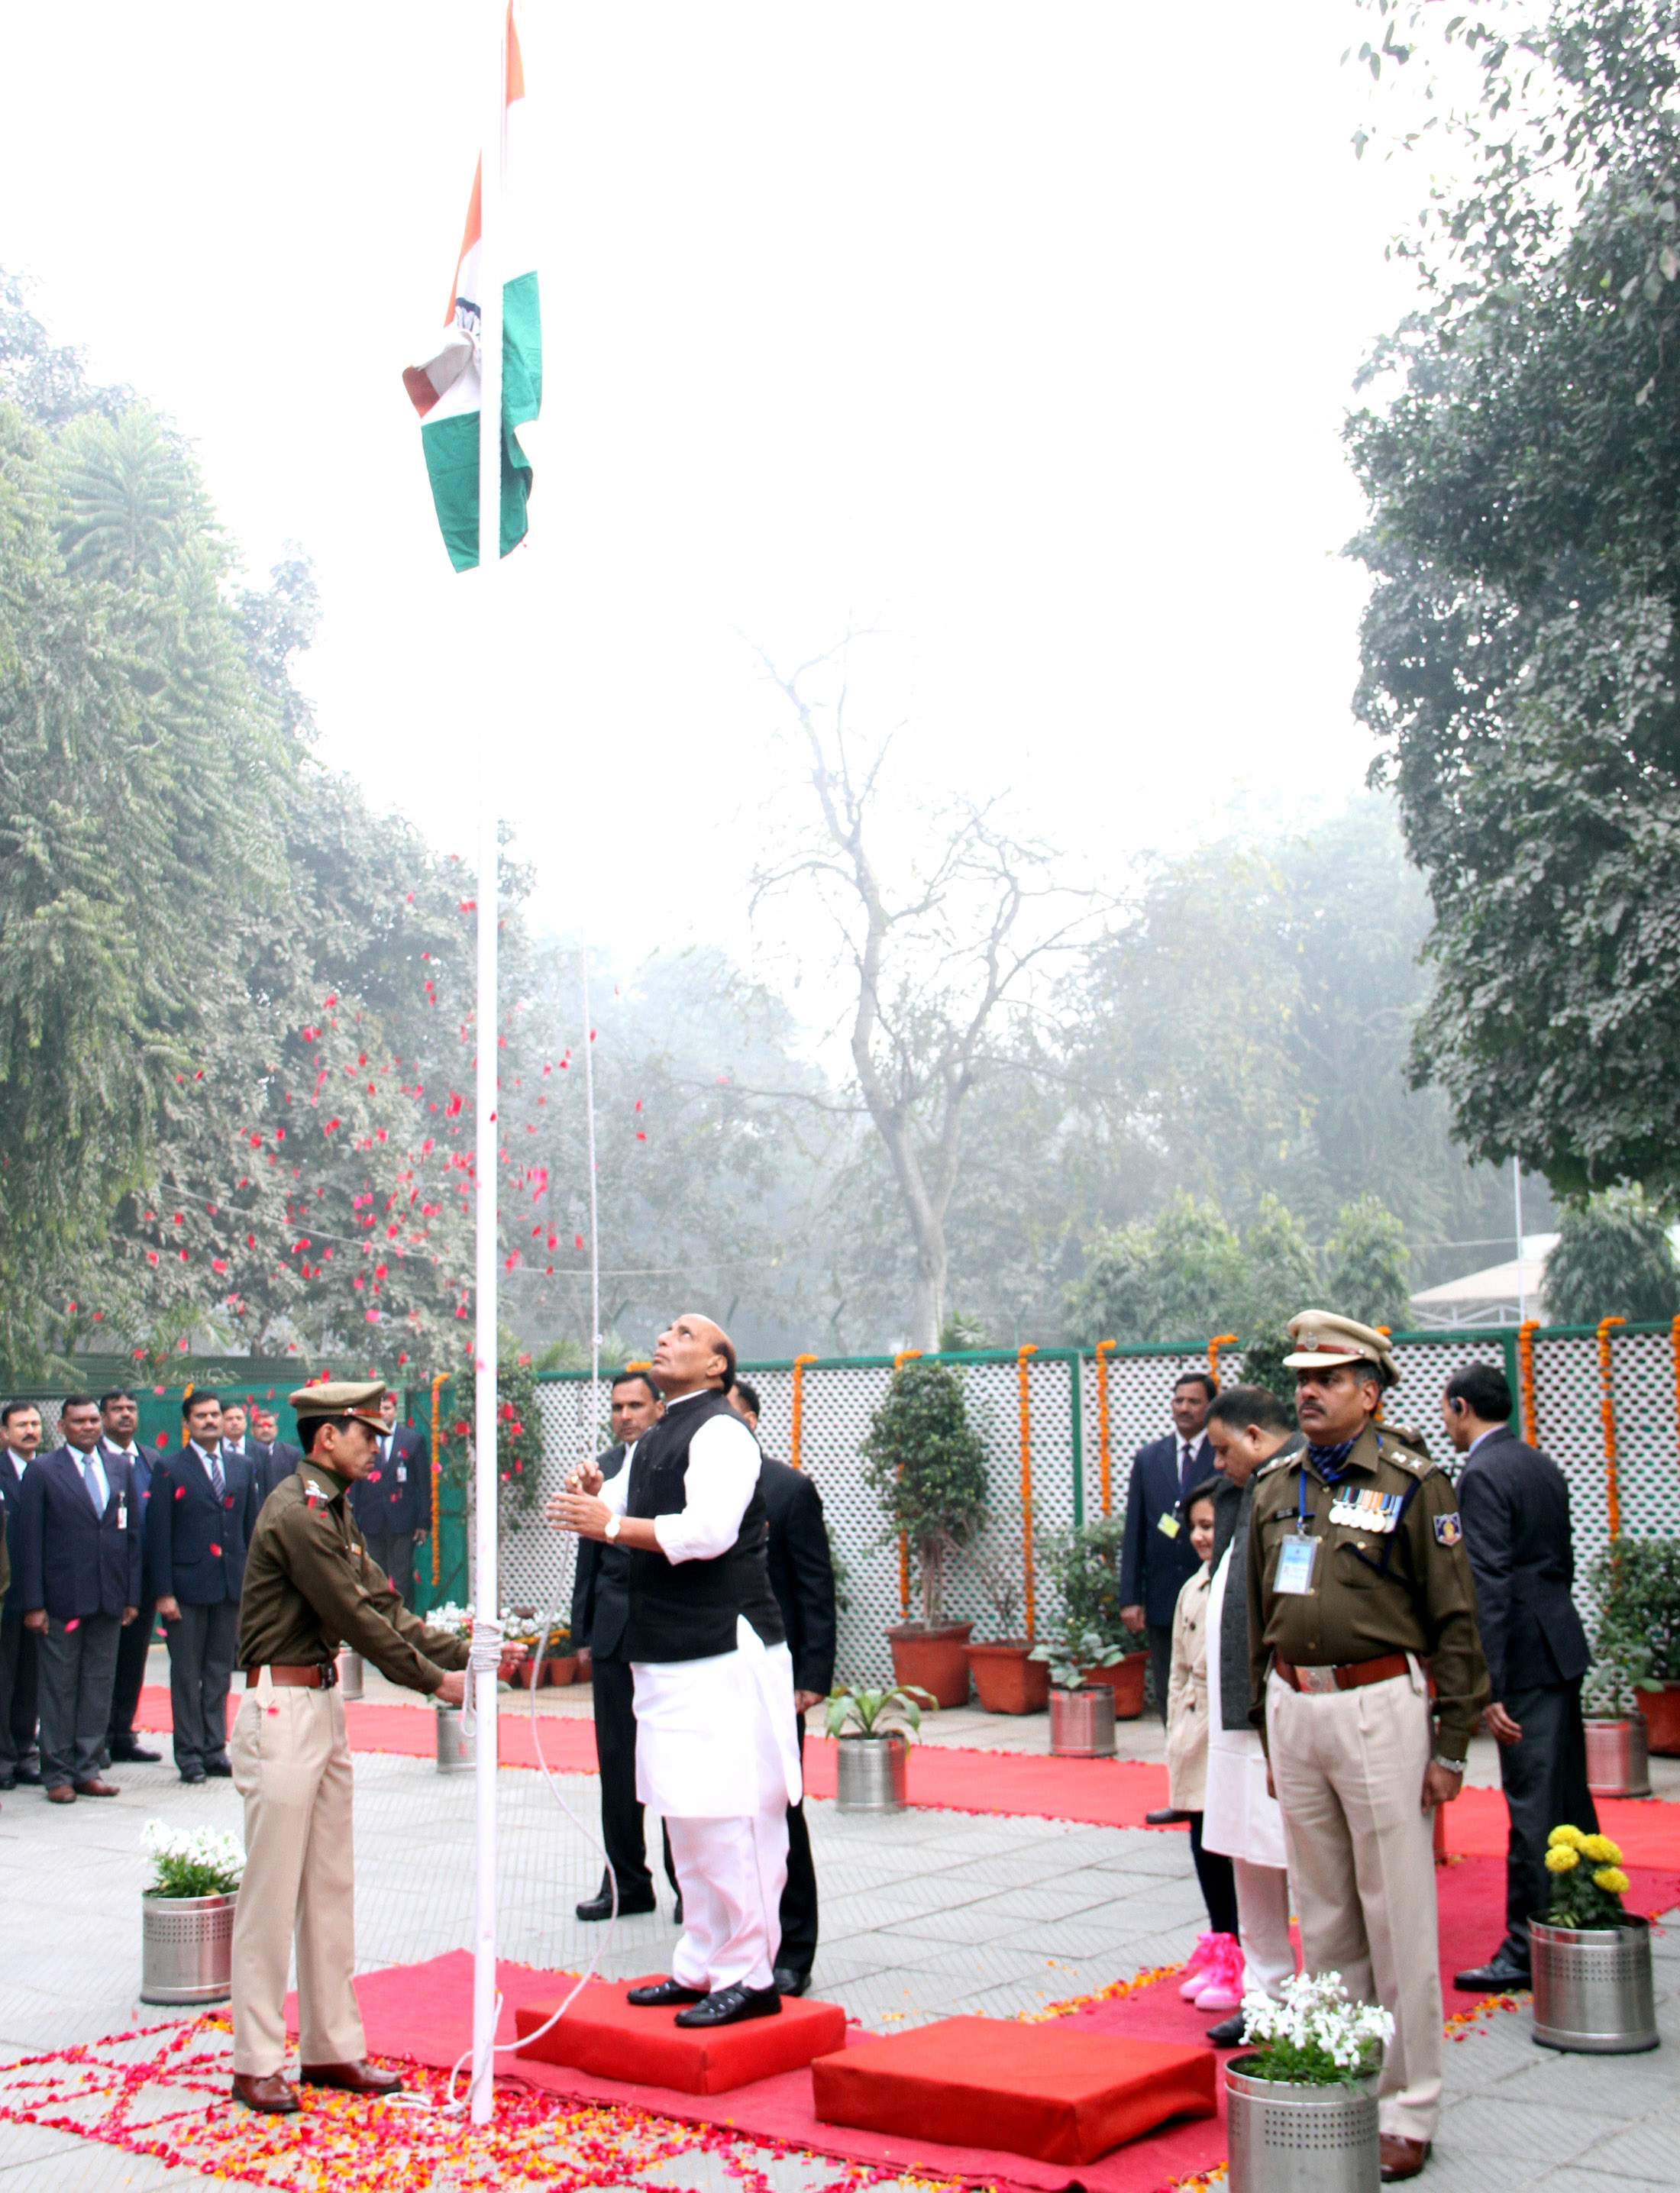 The Union Home Minister, Shri Rajnath Singh unfurled the National Flag on the occasion of the 67th Republic Day, in New Delhi on January 25, 2016.